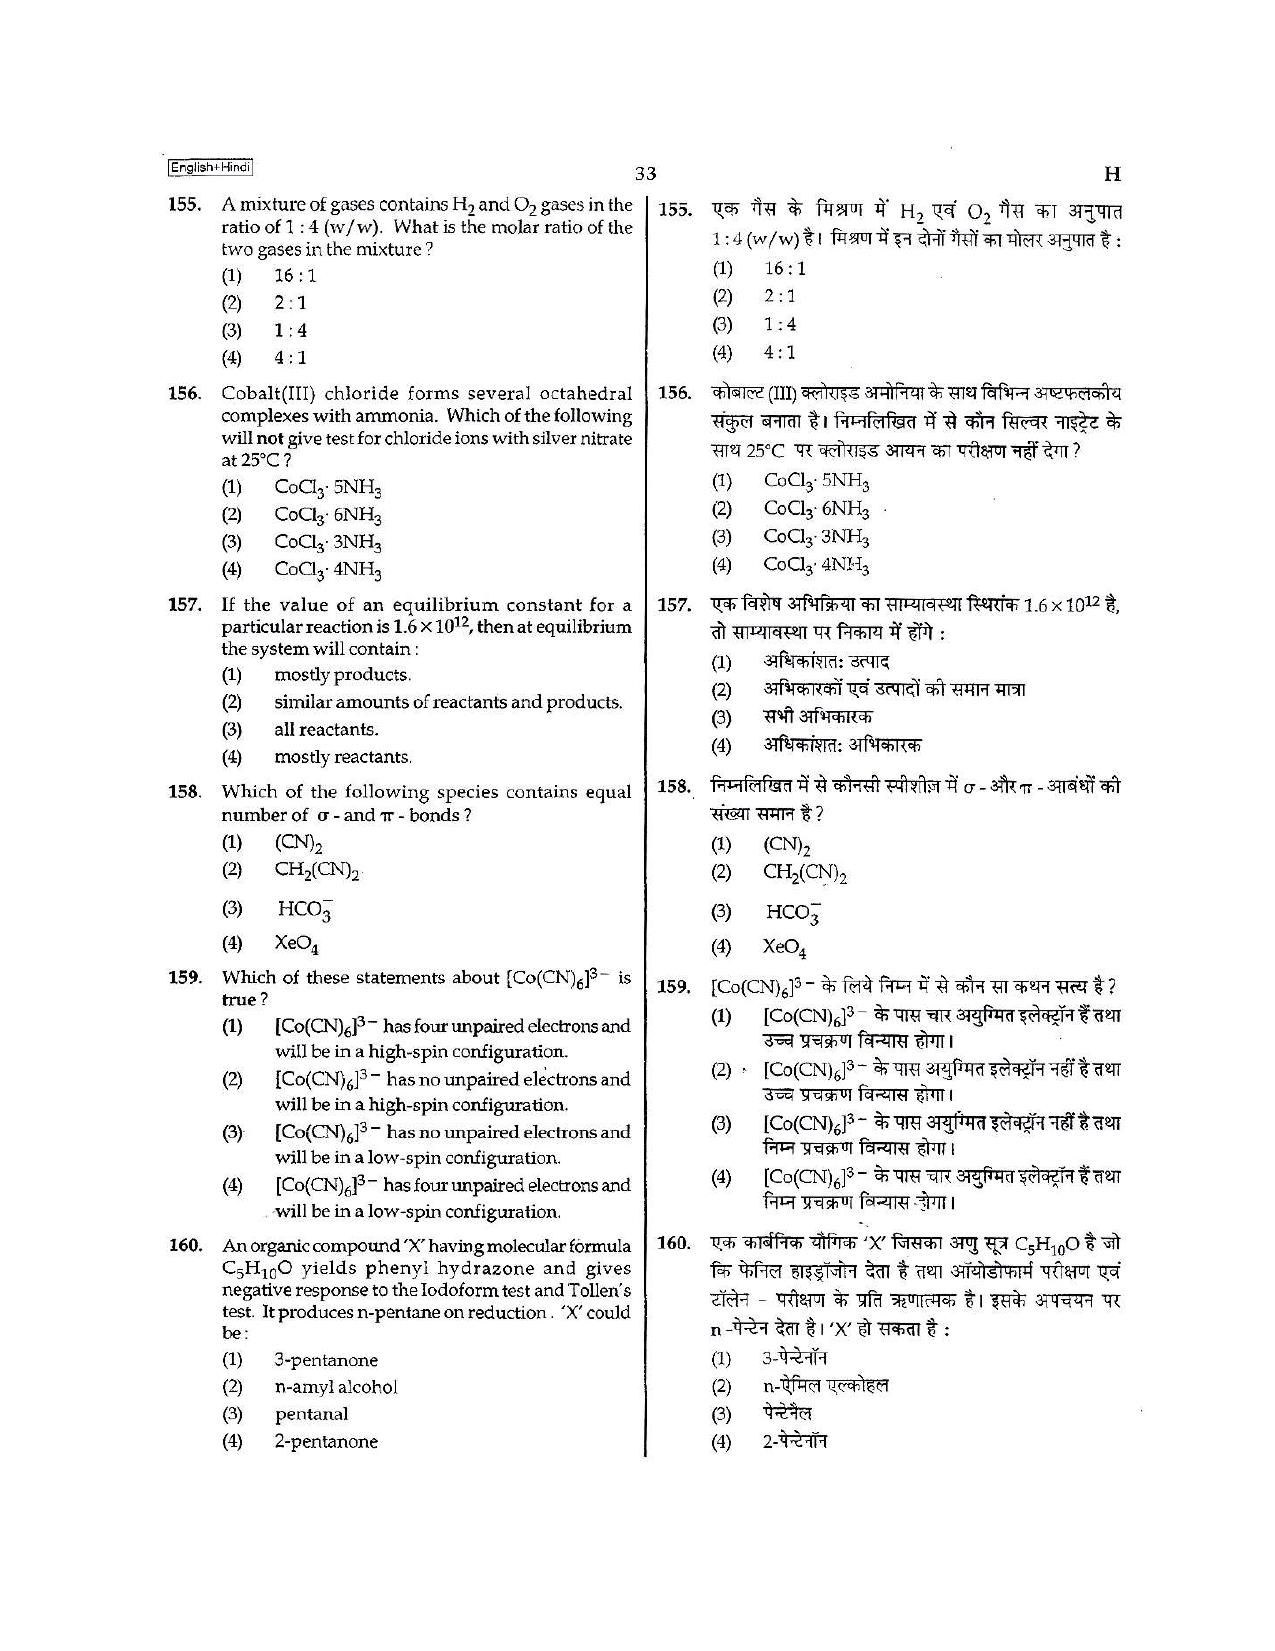 NEET Code H 2015 Question Paper - Page 33